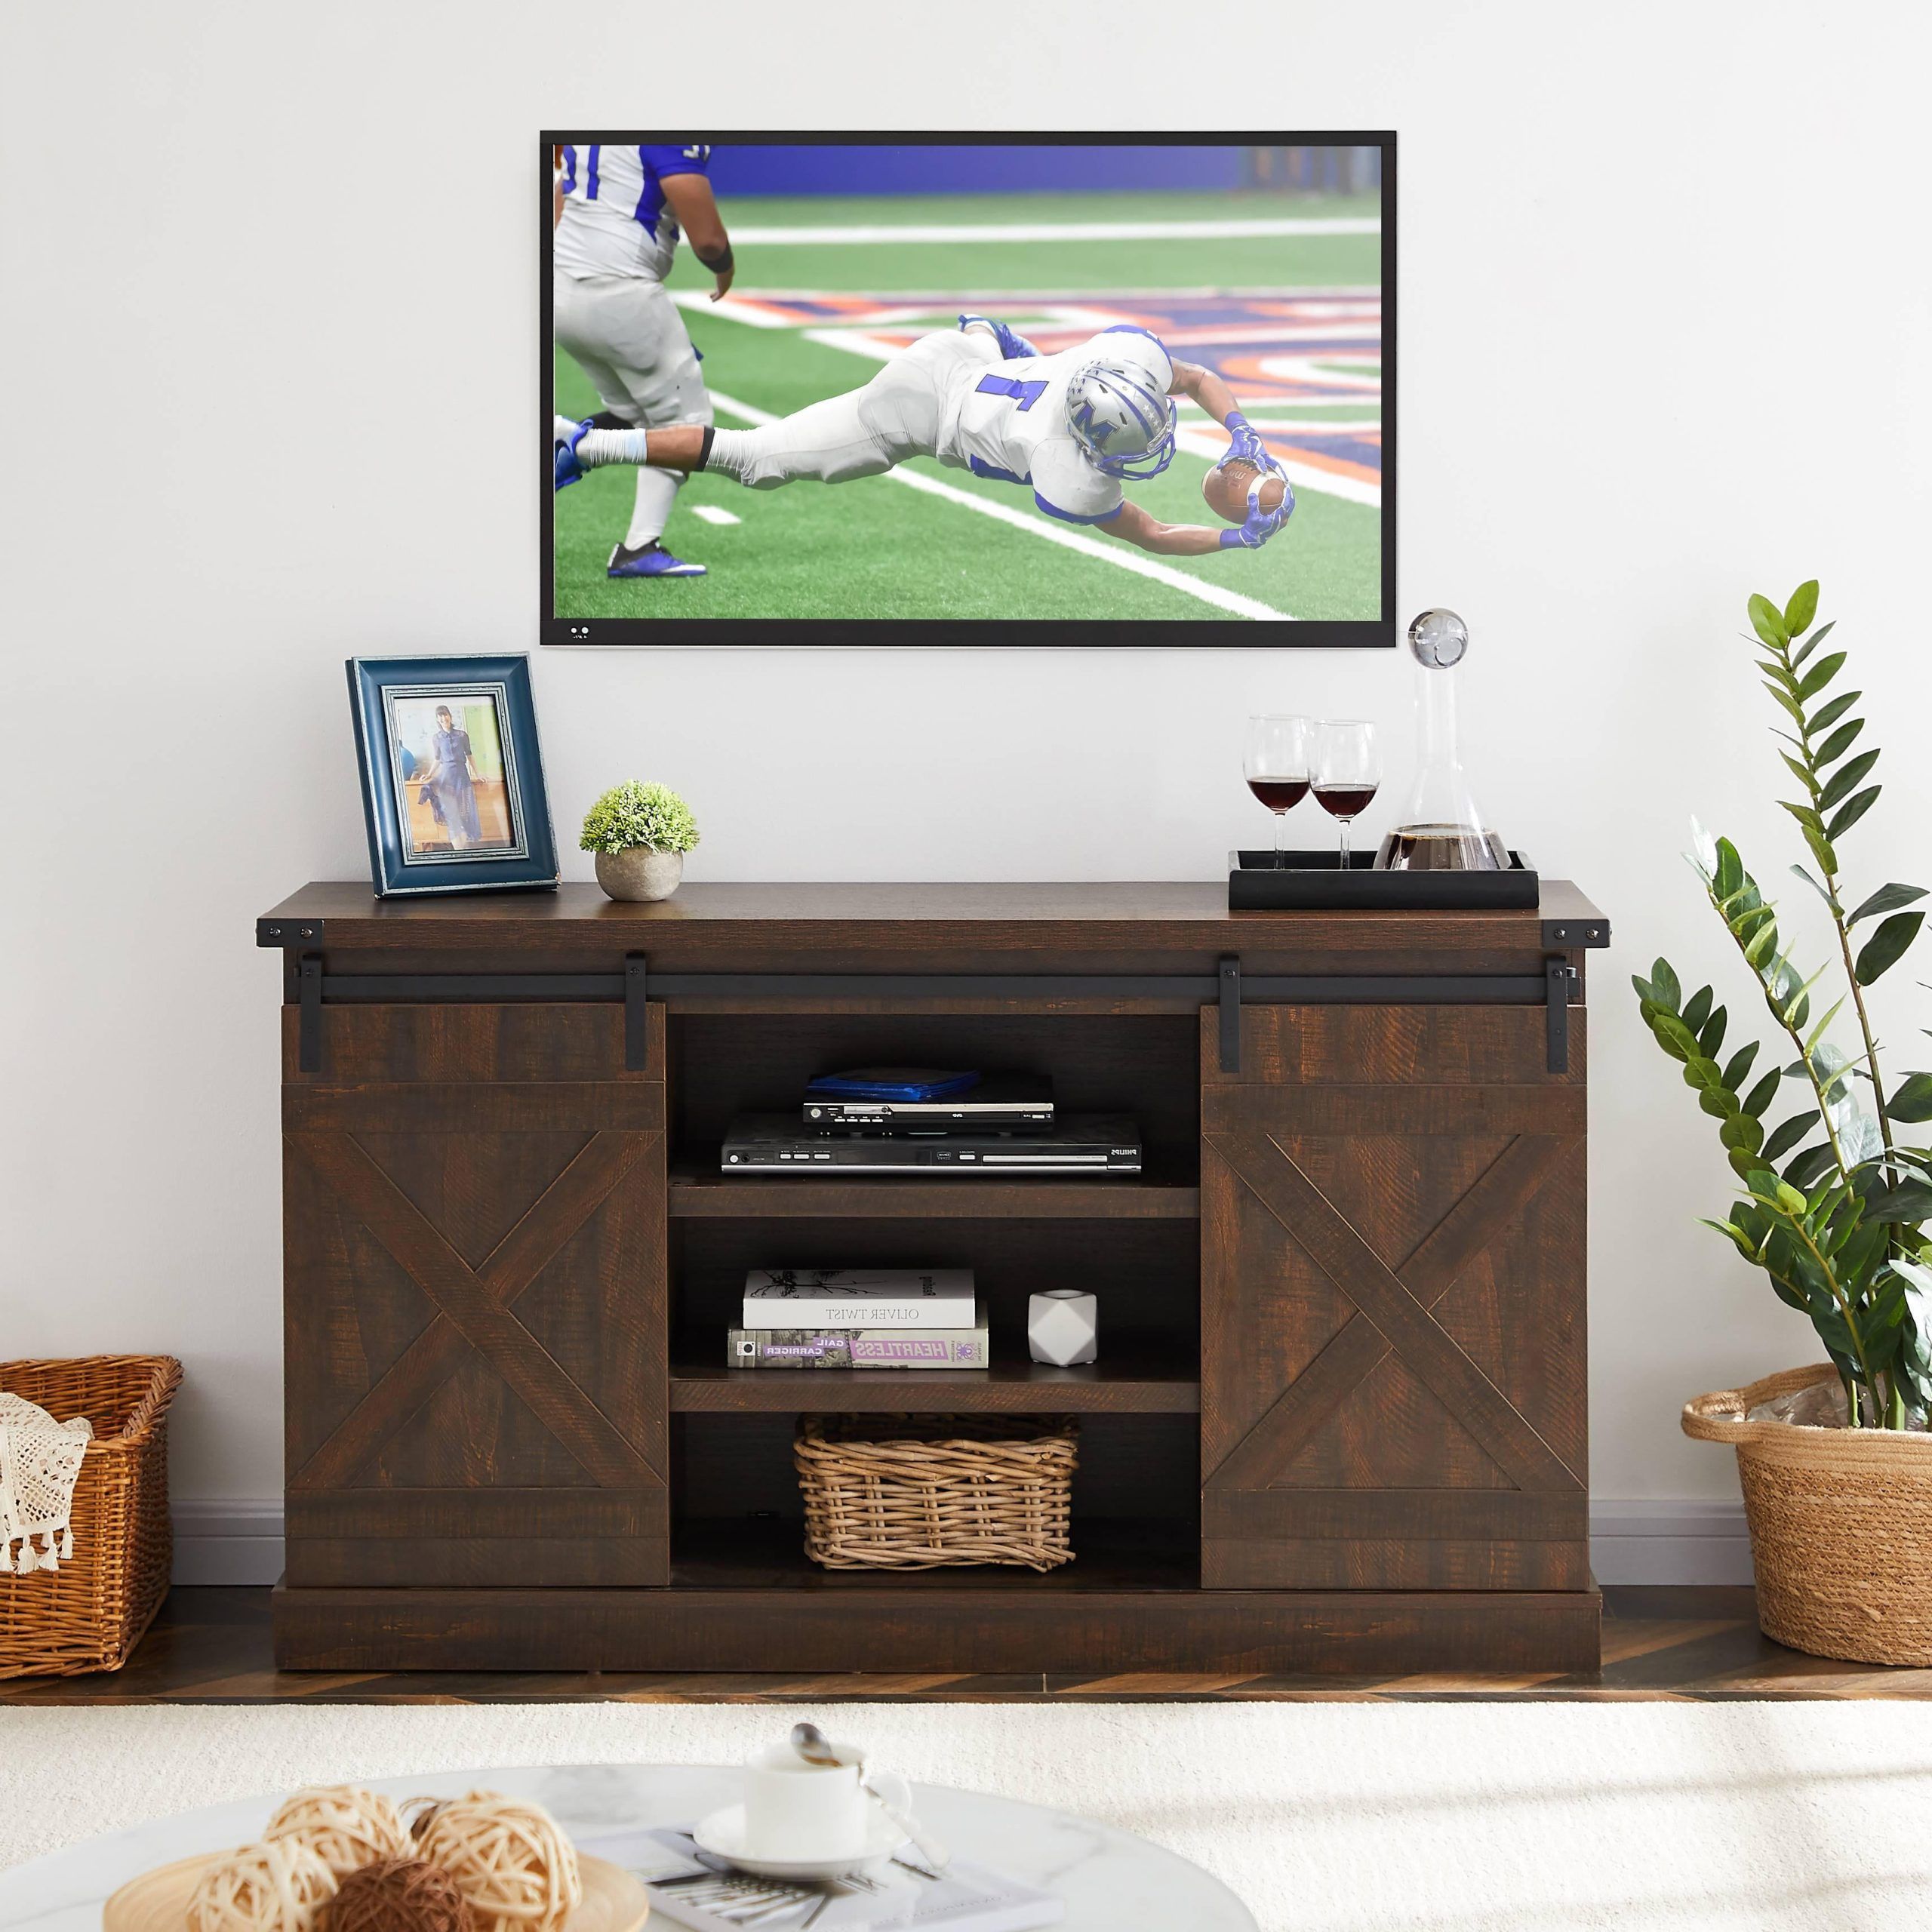 Widely Used 110" Tvs Wood Tv Cabinet With Drawers Within Sliding Barn Door Tv Cabinet With Storage Space And Shelf, Modern (View 14 of 15)